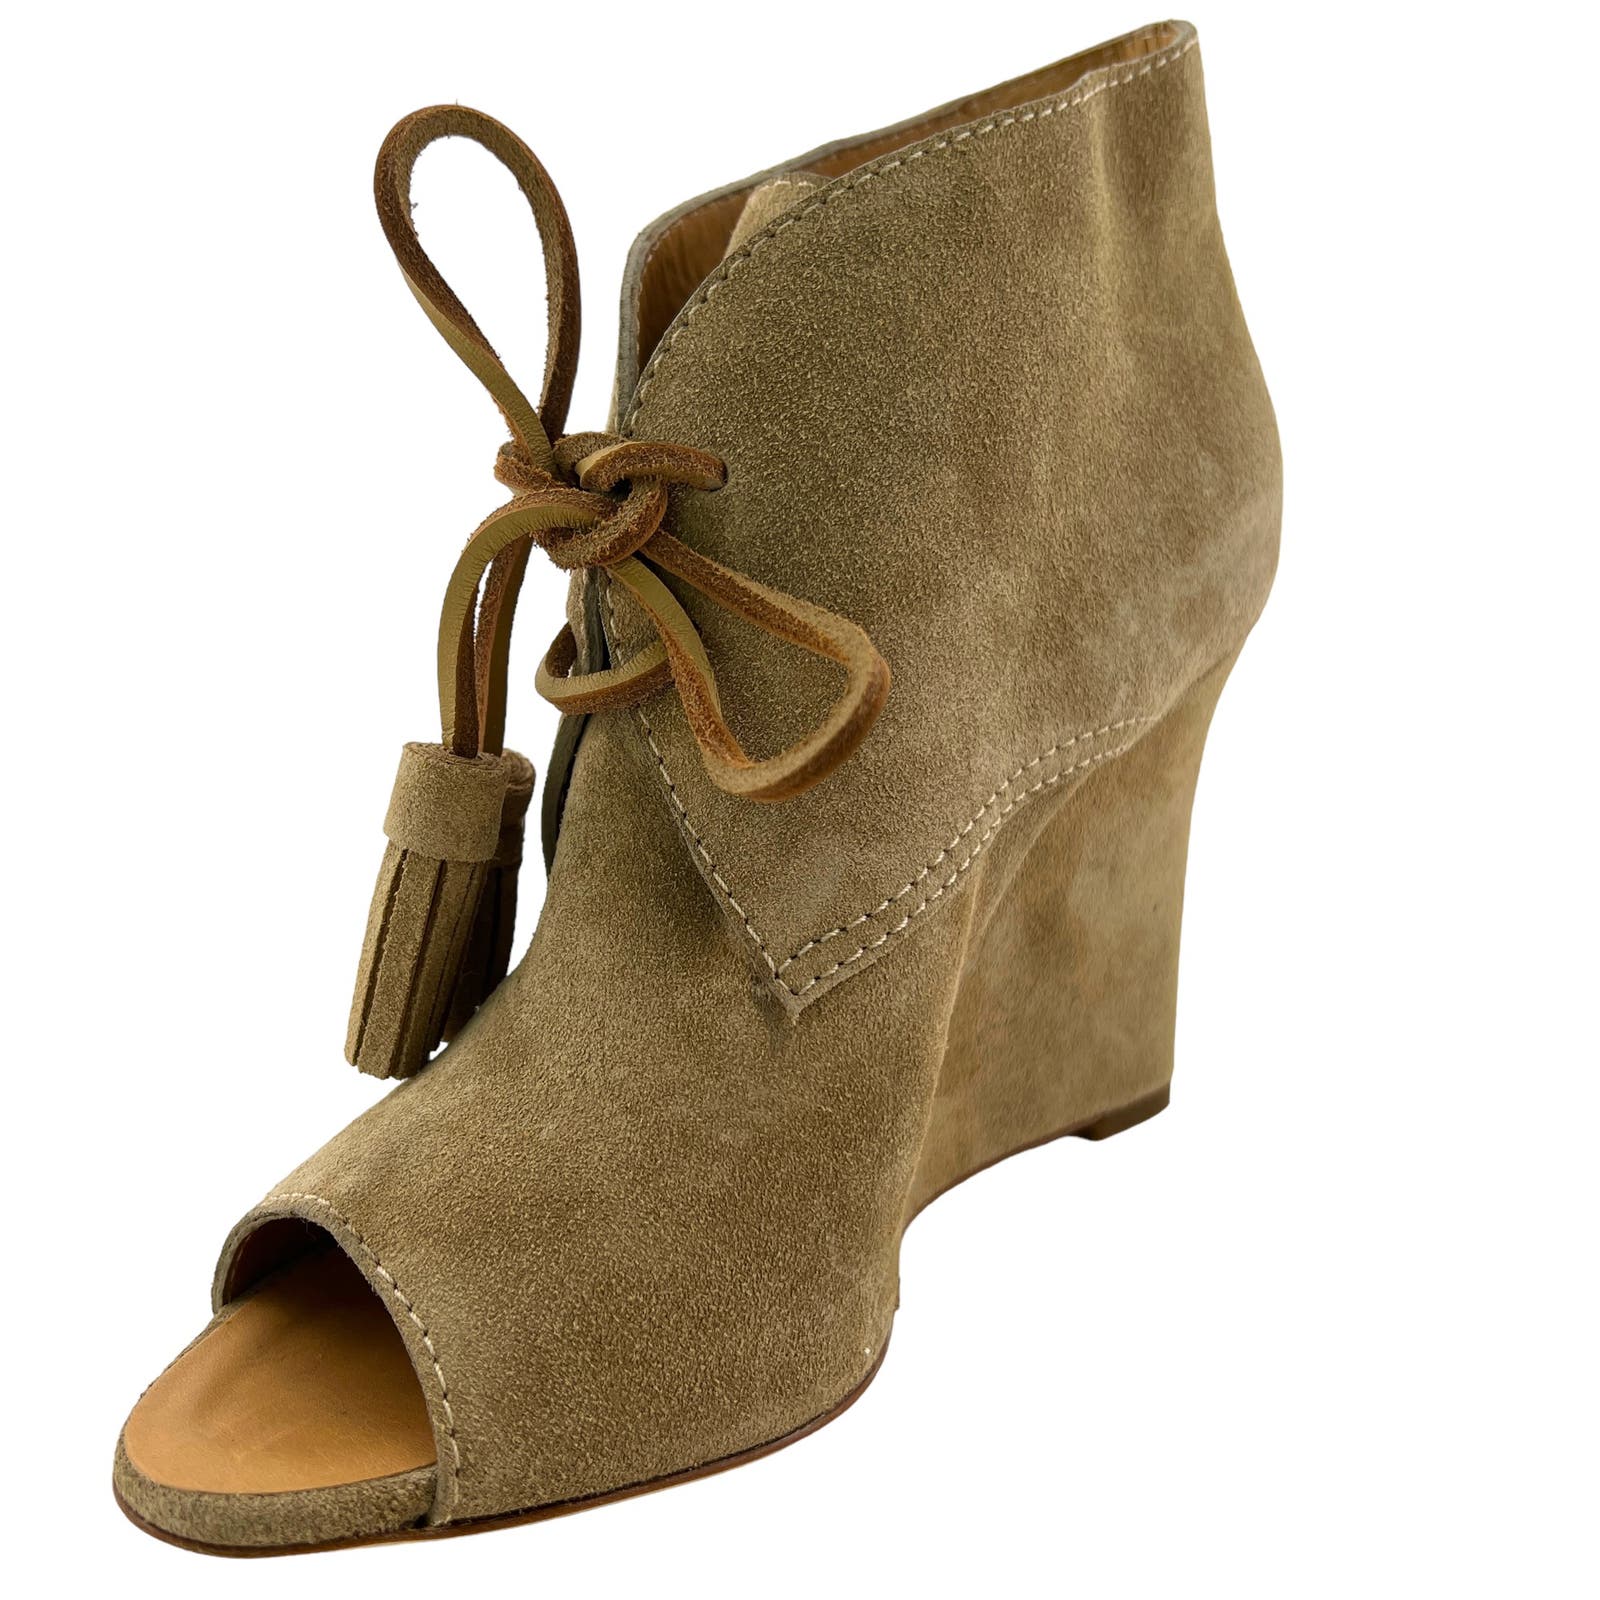 Dsquared2 Women US 7 Booties Suede Leather Peep Toe Wedge Heels Shoes